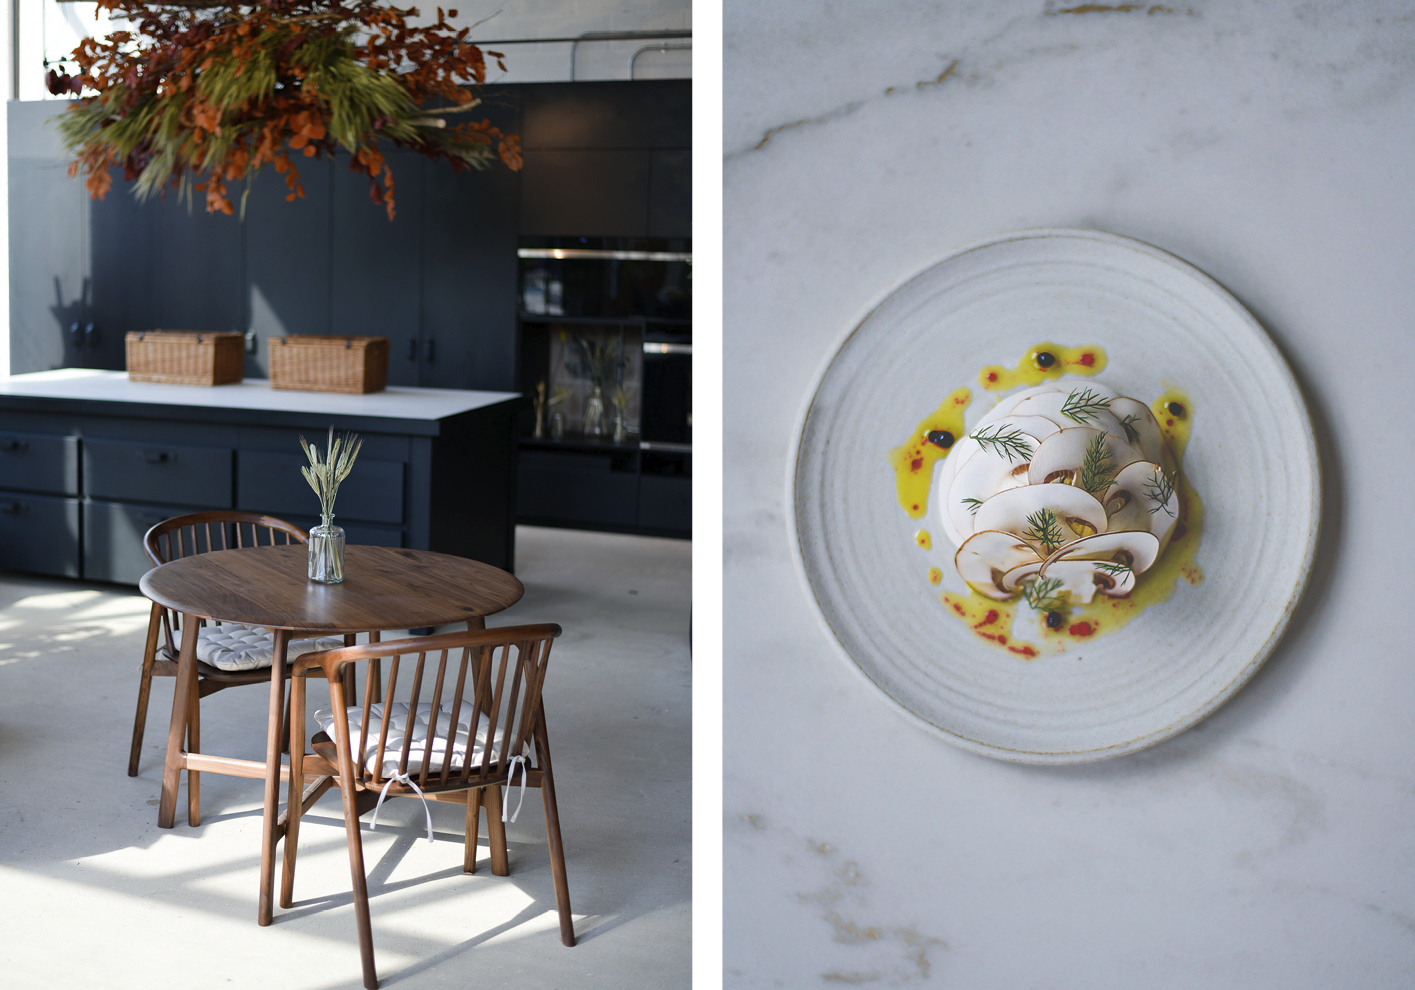 The Water House Project in Bethnal Green offers a supperclub experience as well as in-home fine dining